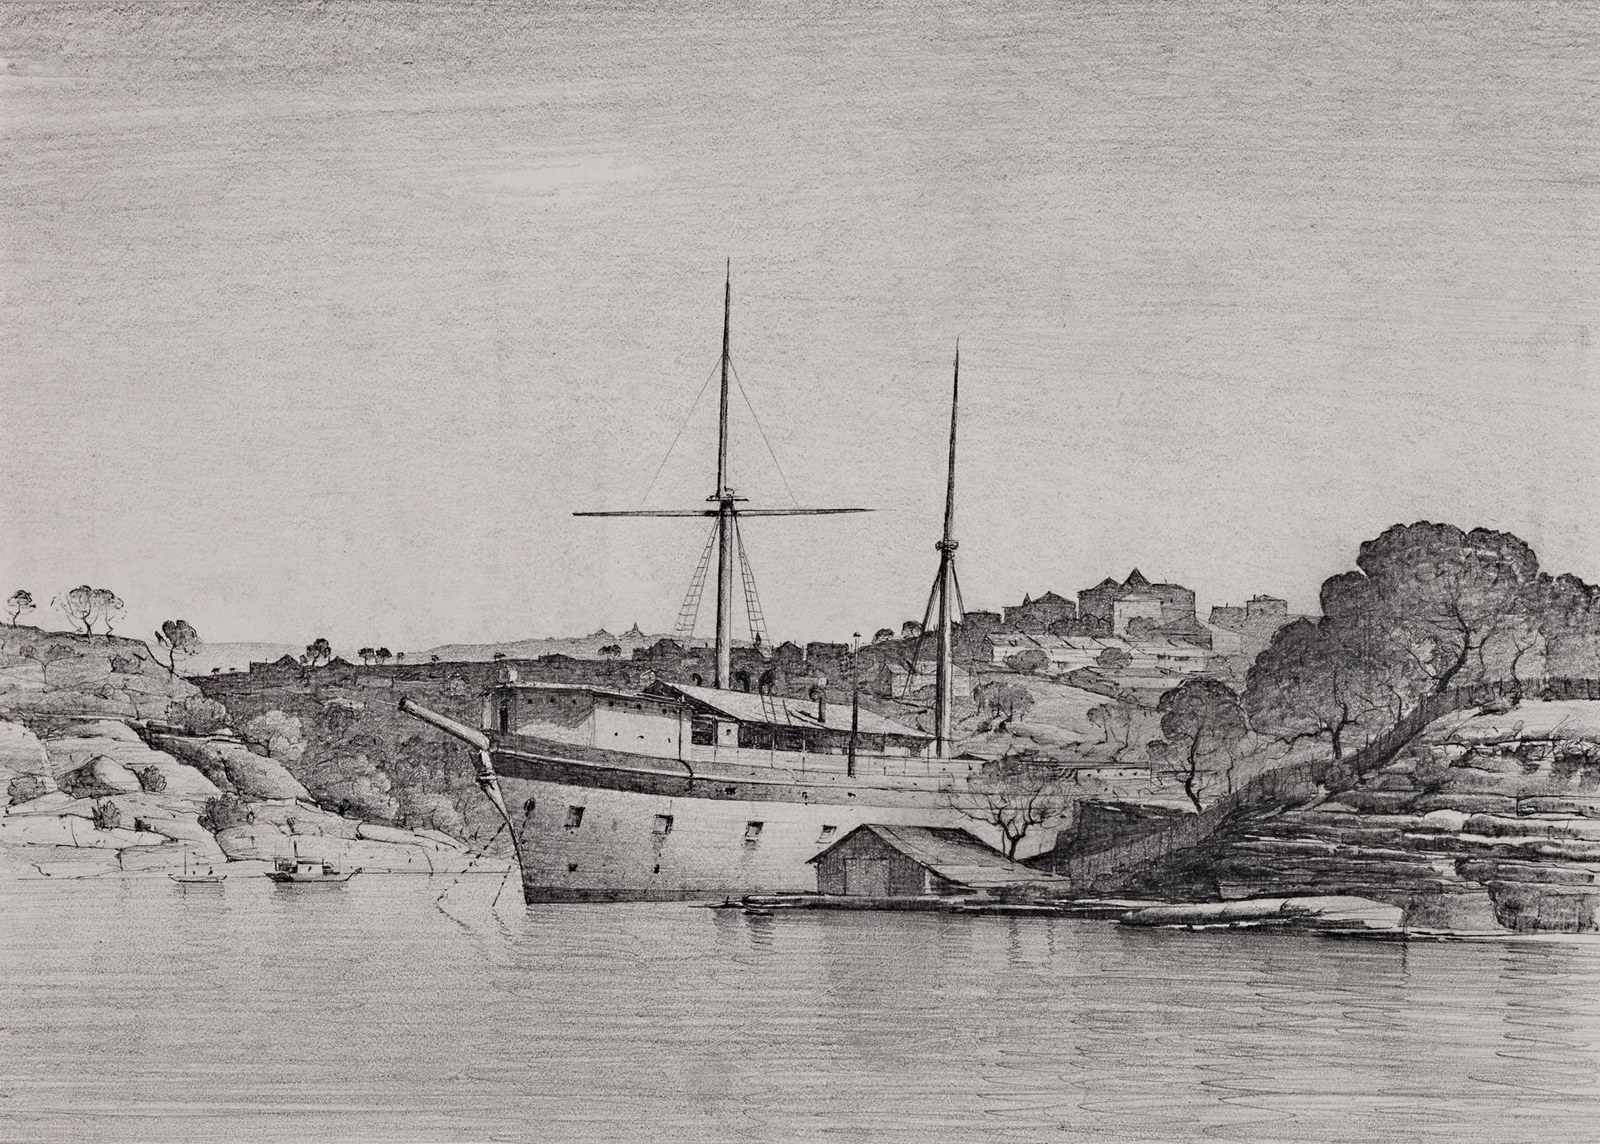 This is a pencil drawing of a ship moored near a headland